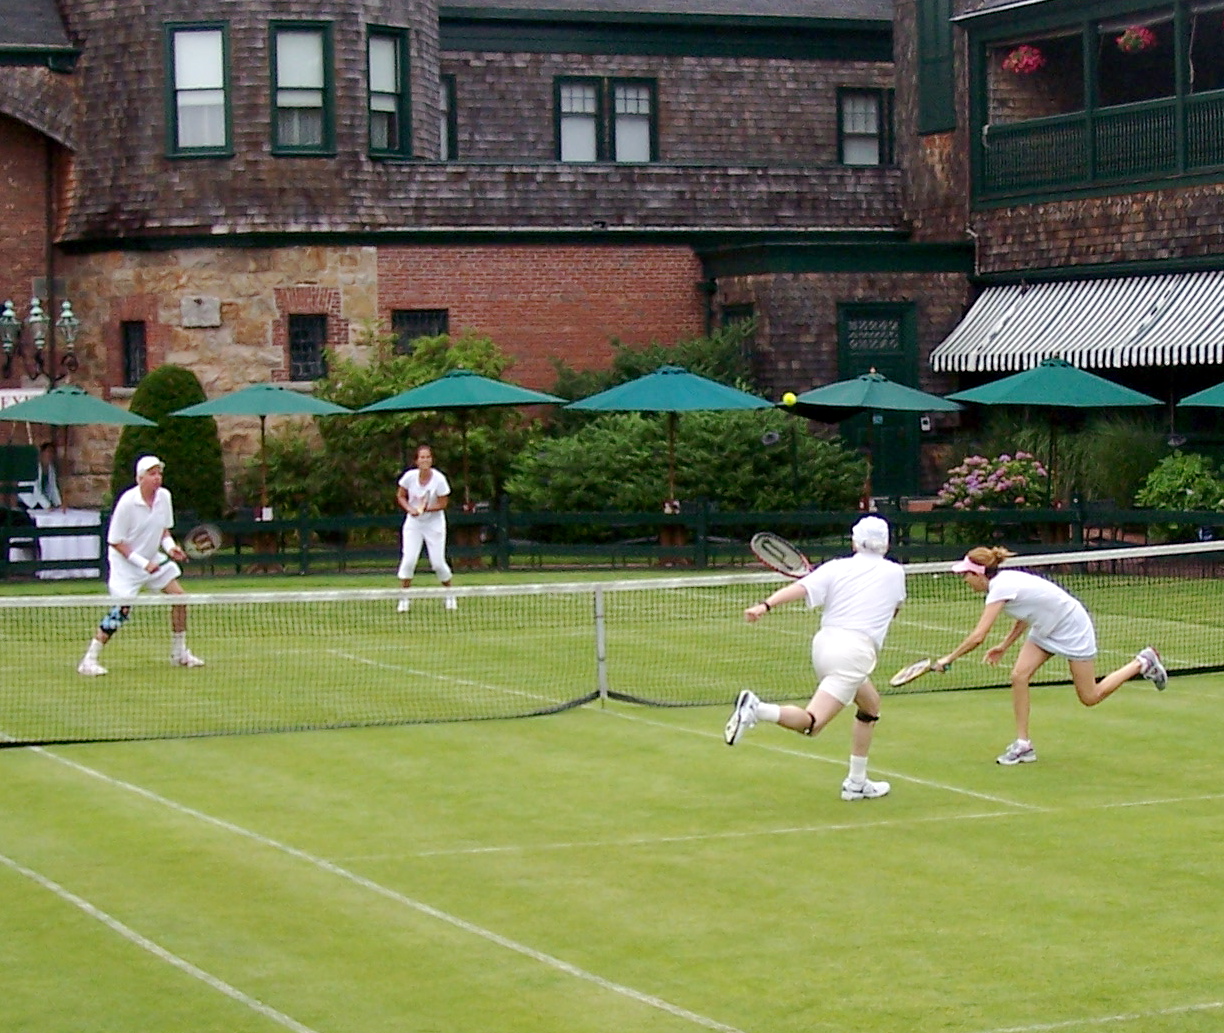 Tennis Court Bucket List The Grass Courts at The Tennis Hall Of Fame